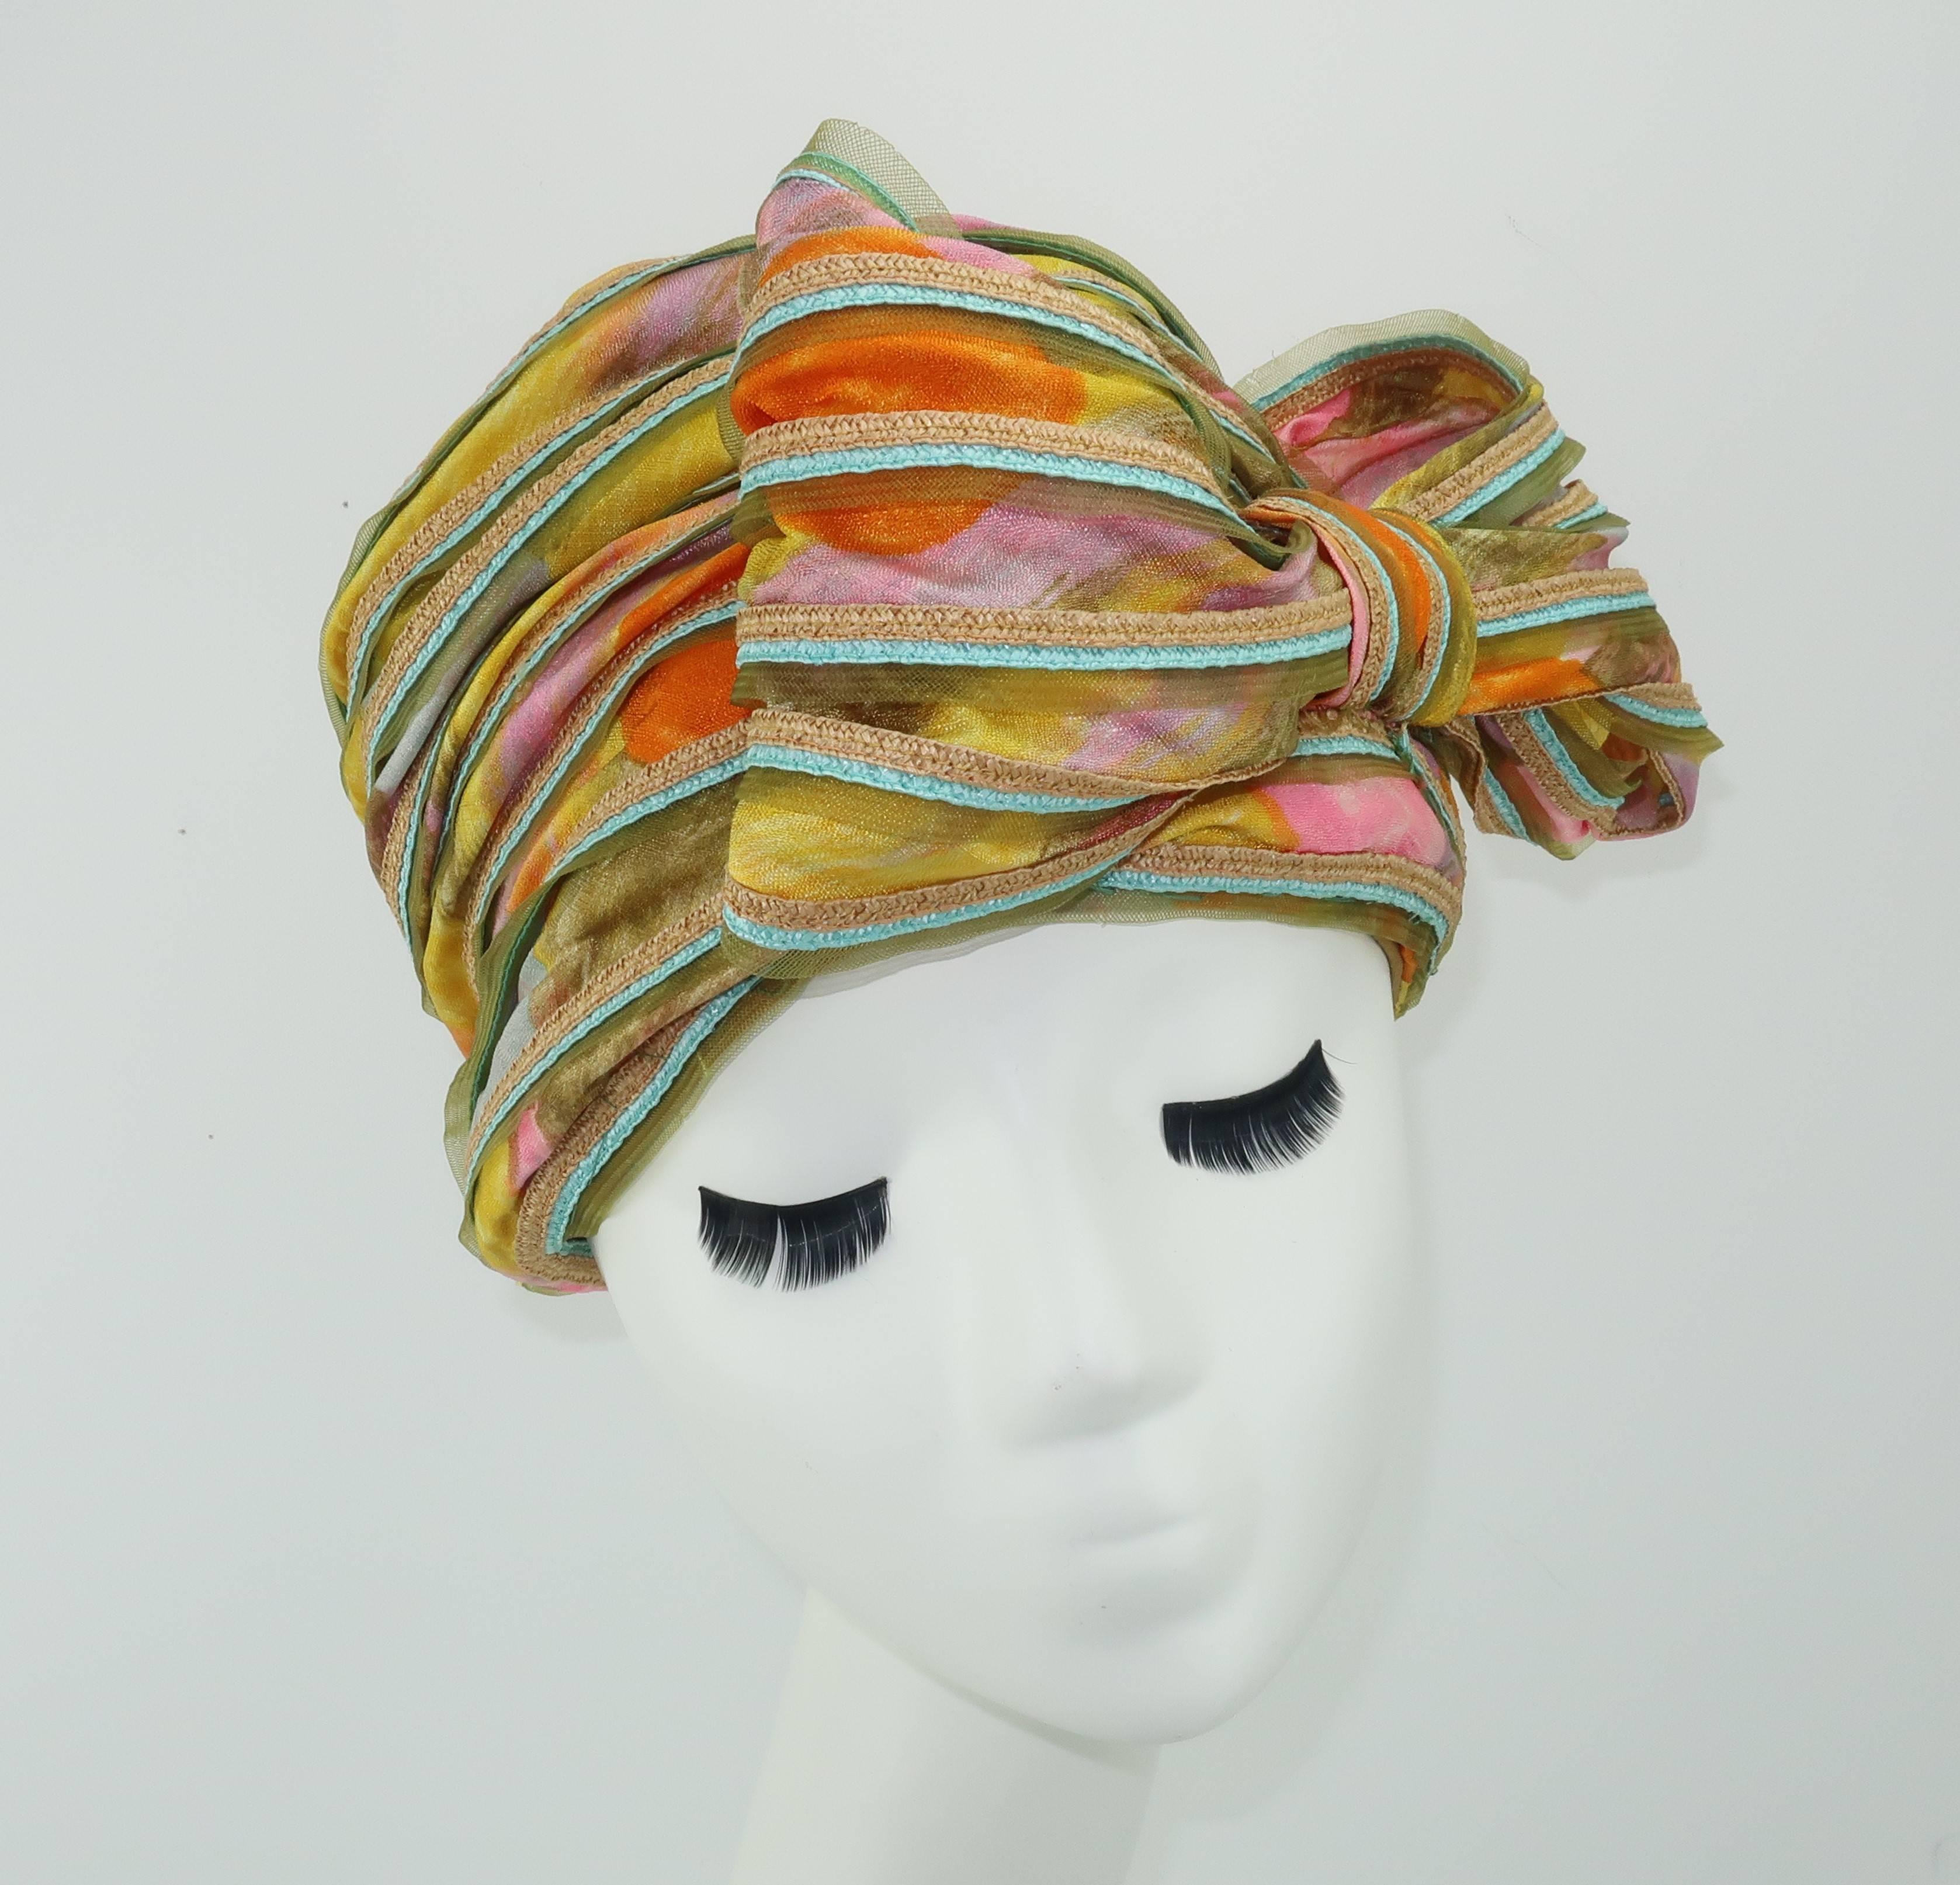 This adorable confectionery hat designed by John Harberger for his millinery line, Mr. John Jr., has a whimsical 1960's aesthetic.  The construction of the hat is quite elaborate and consists of layered pastel floral fabric, natural and aqua blue